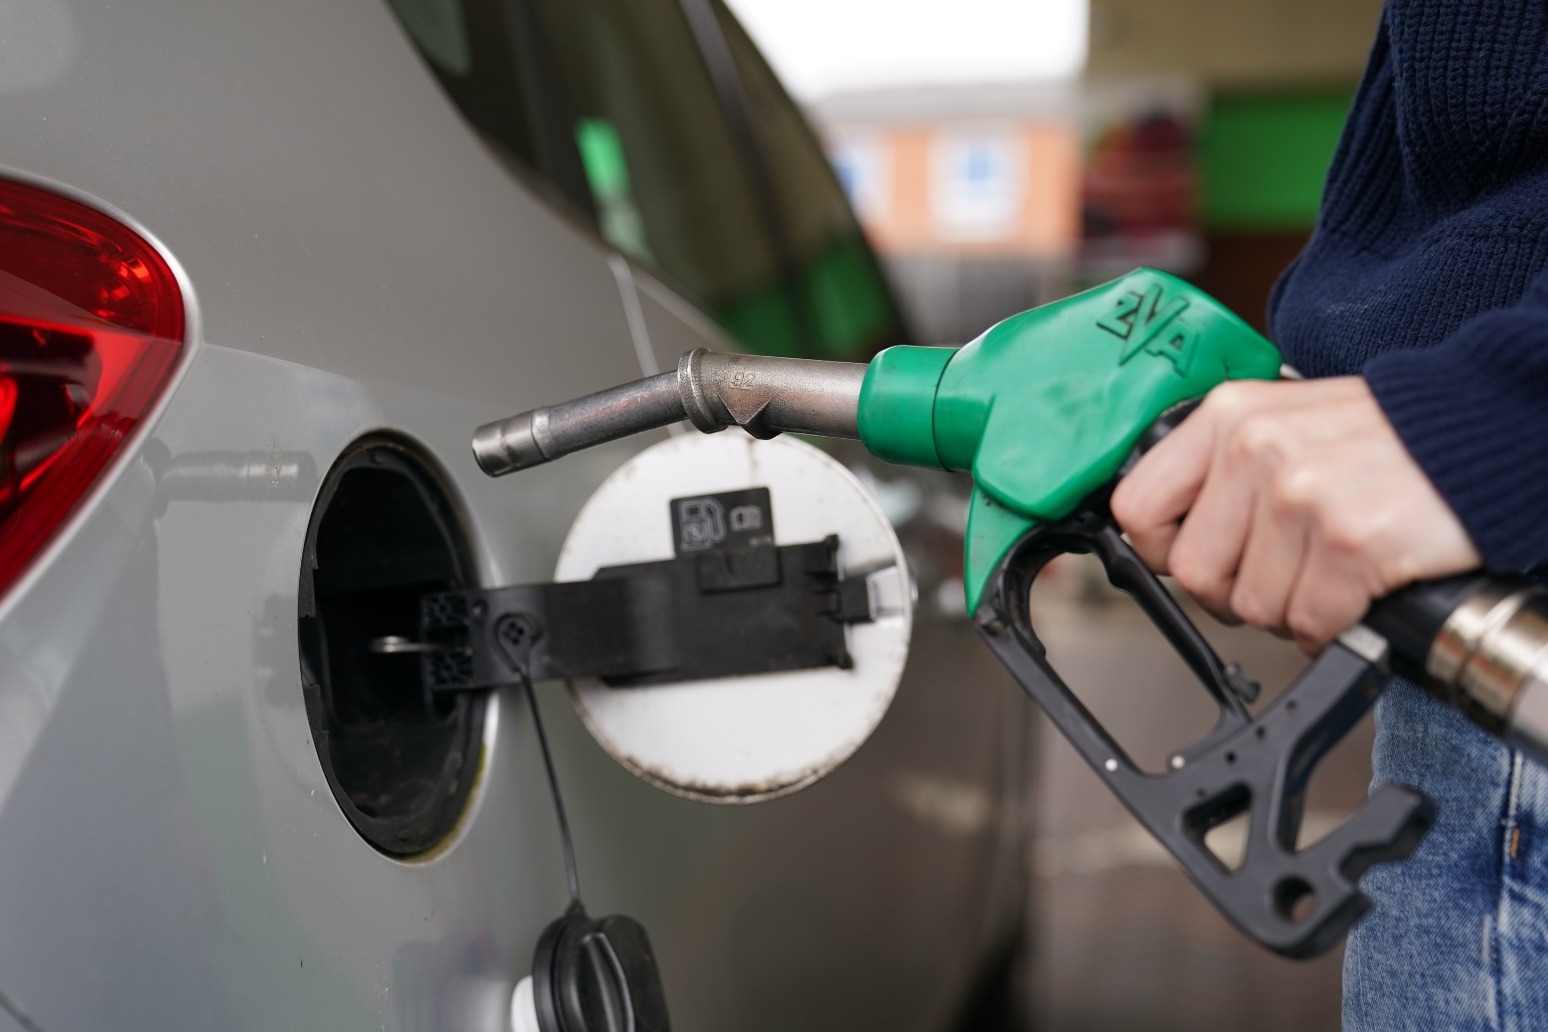 Fuel prices should be 3p a litre lower says the AA